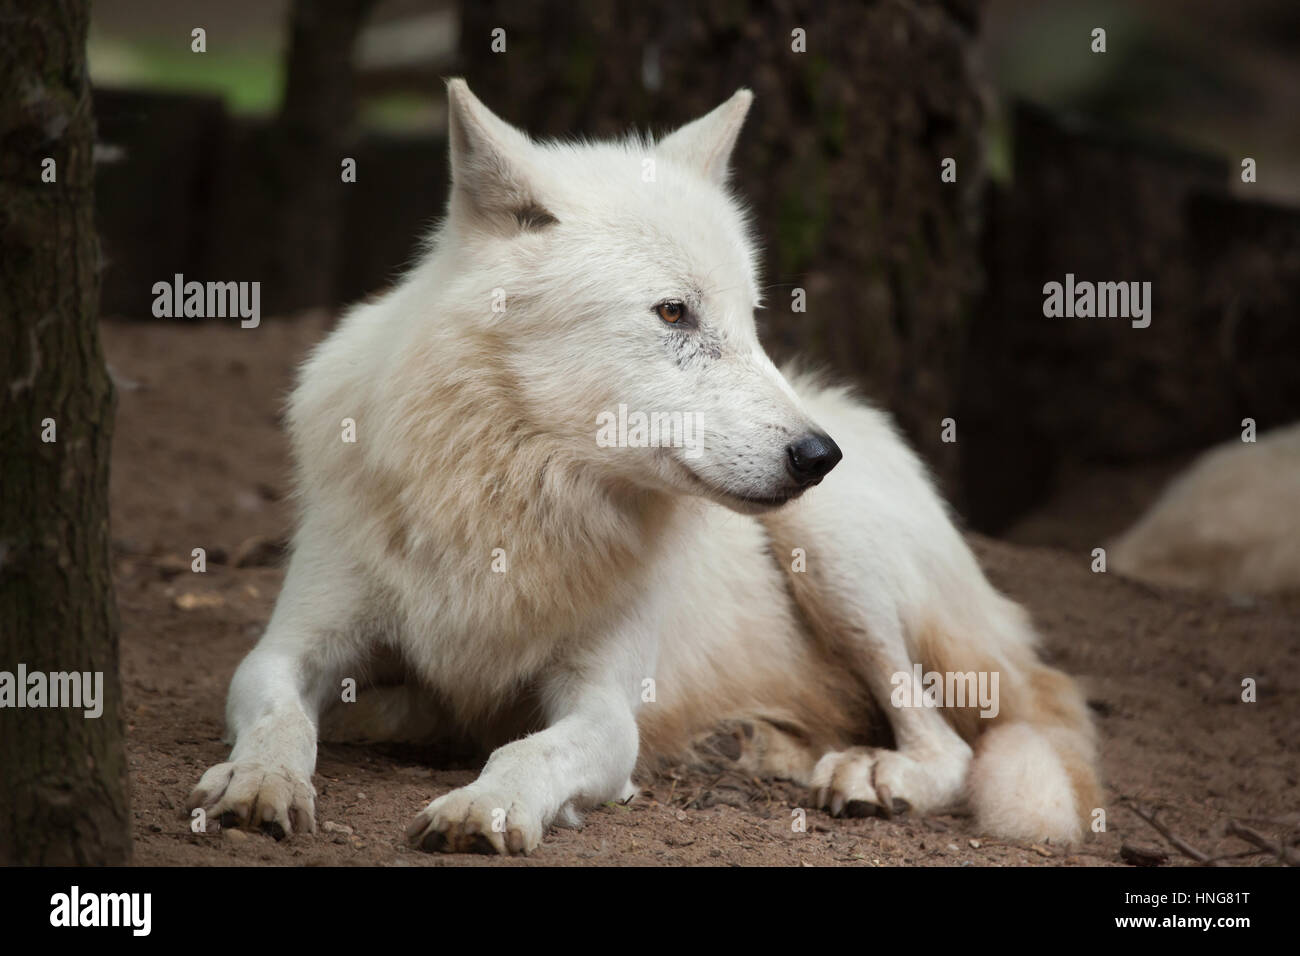 Arctic wolf (Canis lupus arctos), also known as the Melville Island wolf. Stock Photo